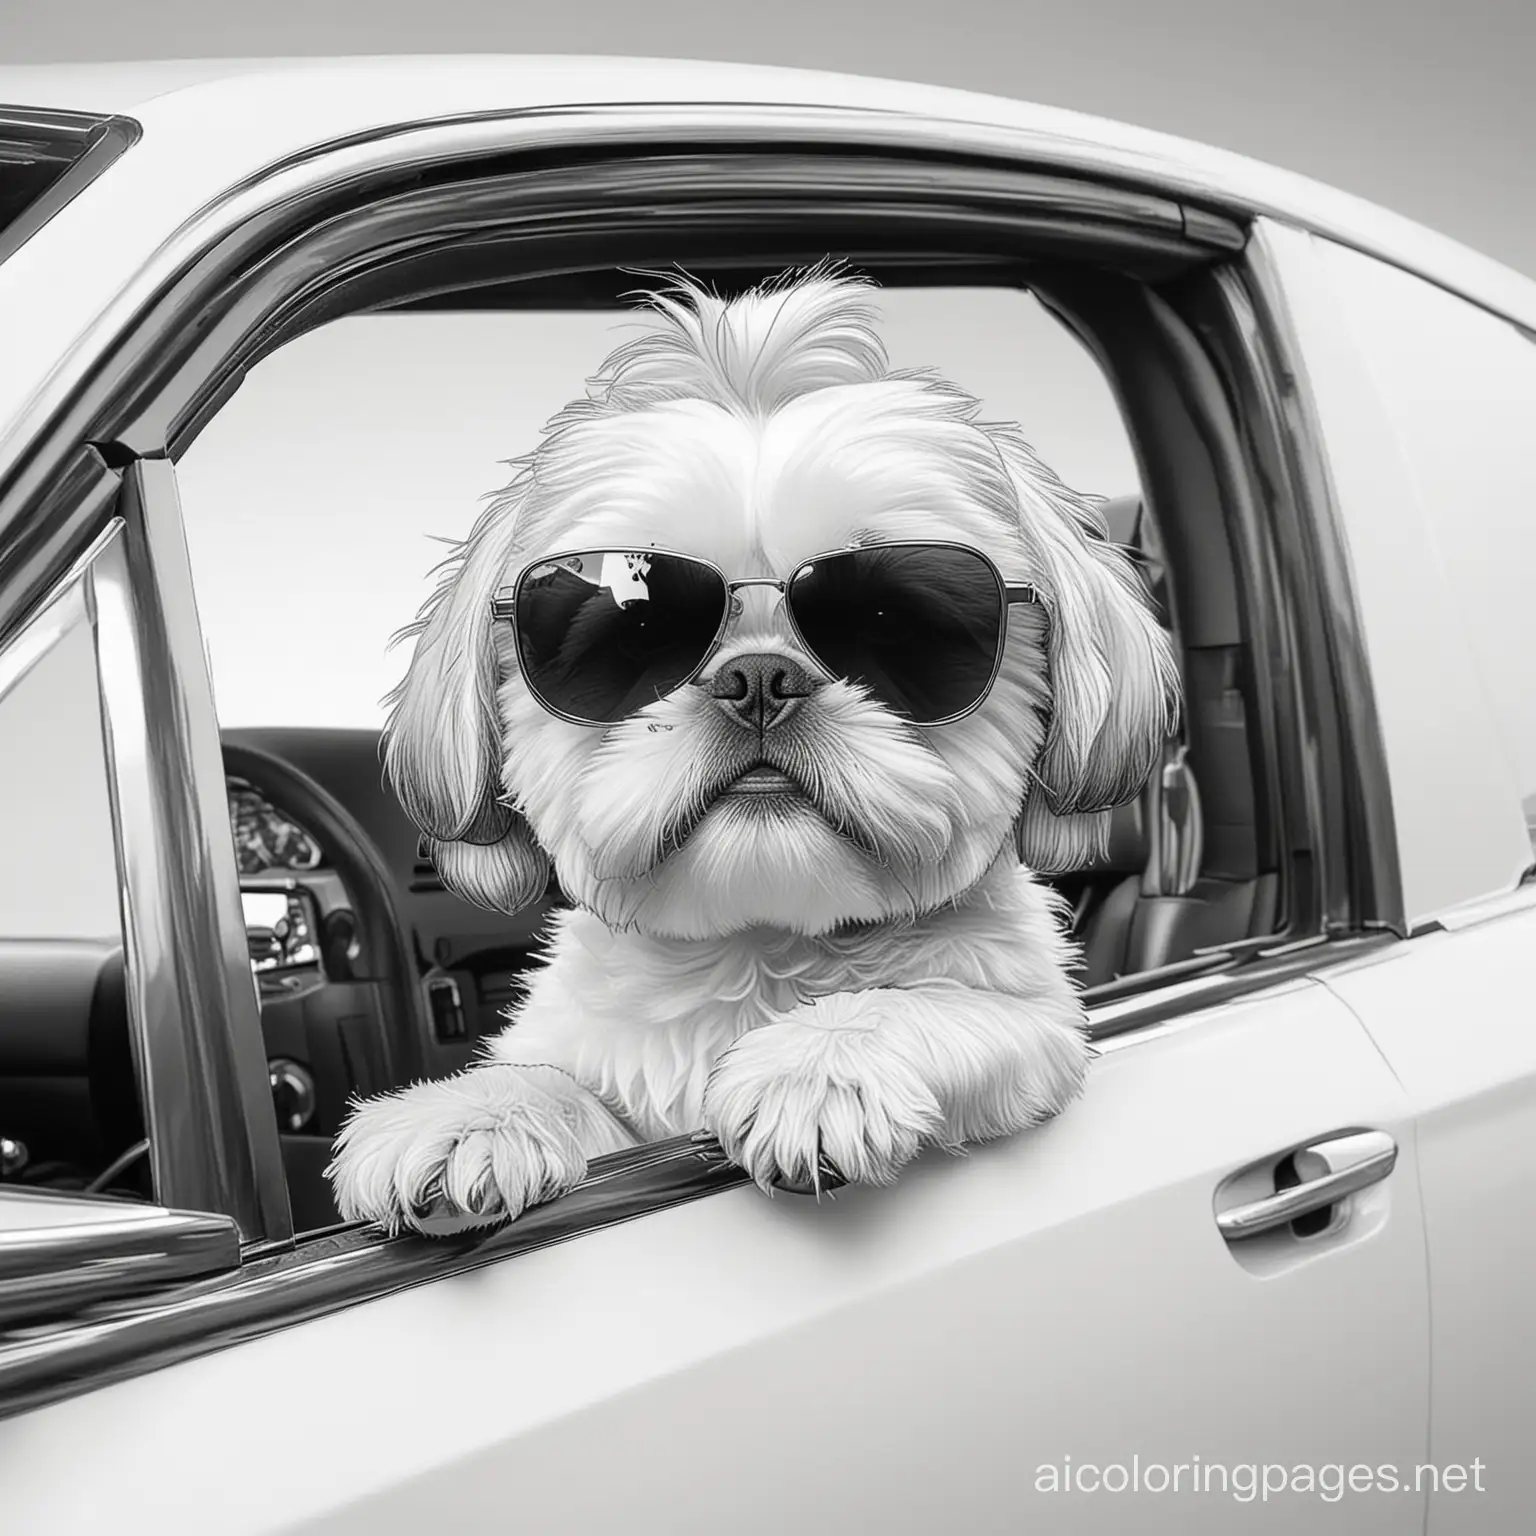 Shih-Tzu-Dog-with-Sunglasses-in-Luxury-Car-Coloring-Page